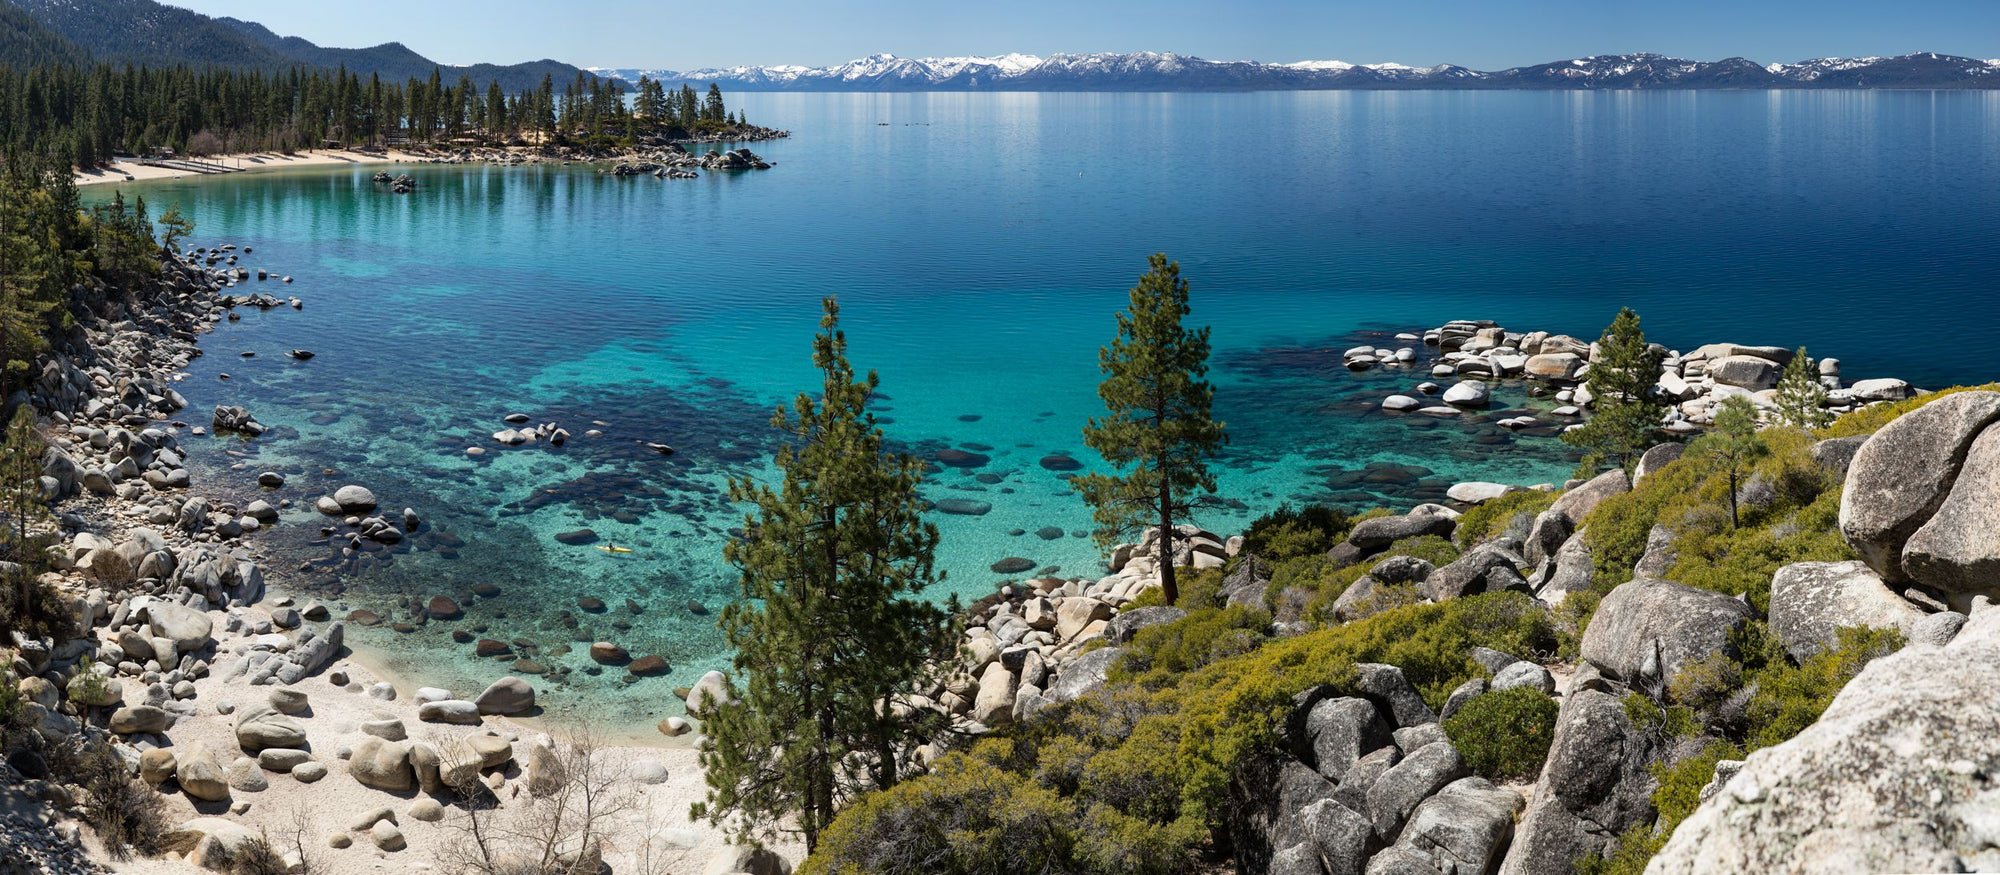 Snow capped peaks pine trees surrounding the turquoise waters of Lake Tahoe.